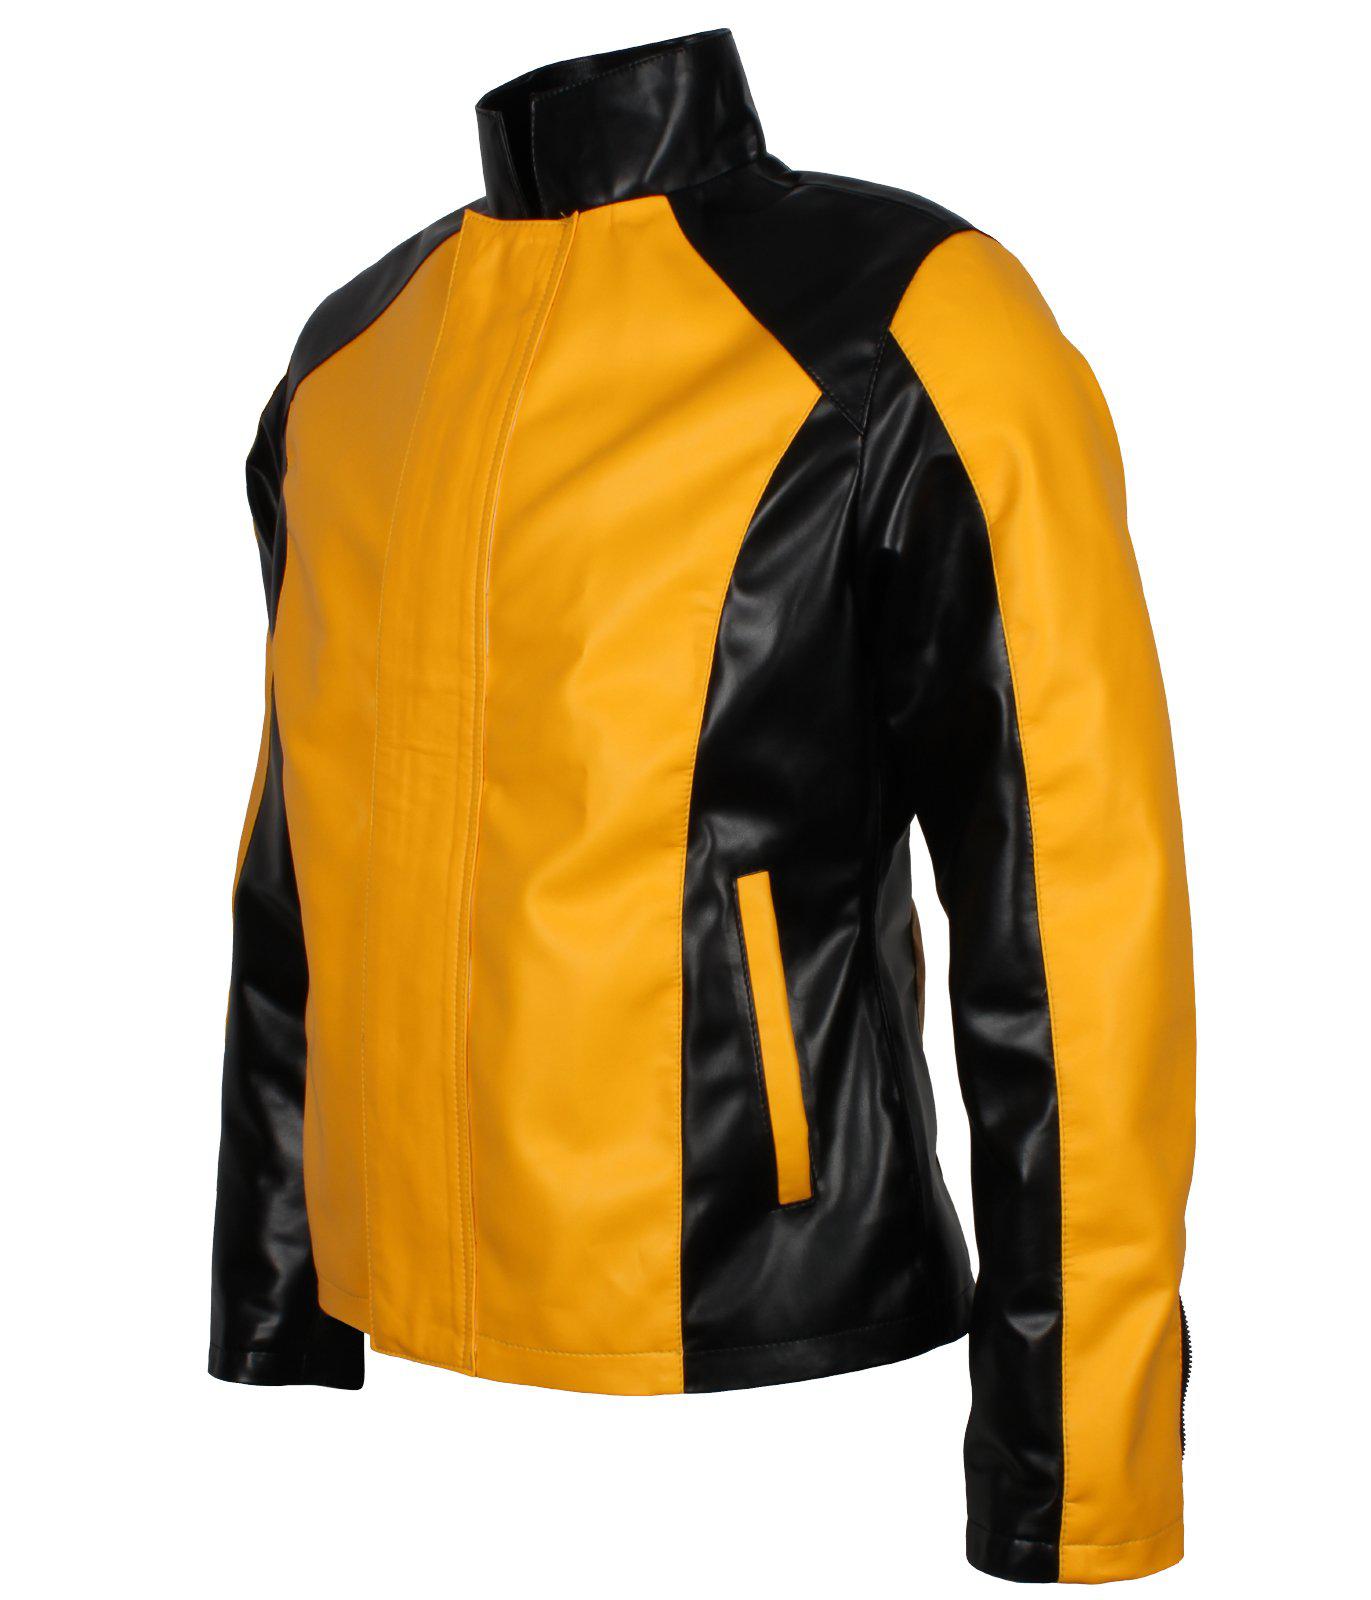 Infamous 2 Cole Macgrath – Leather AlexGear Black and Yellow Jacket